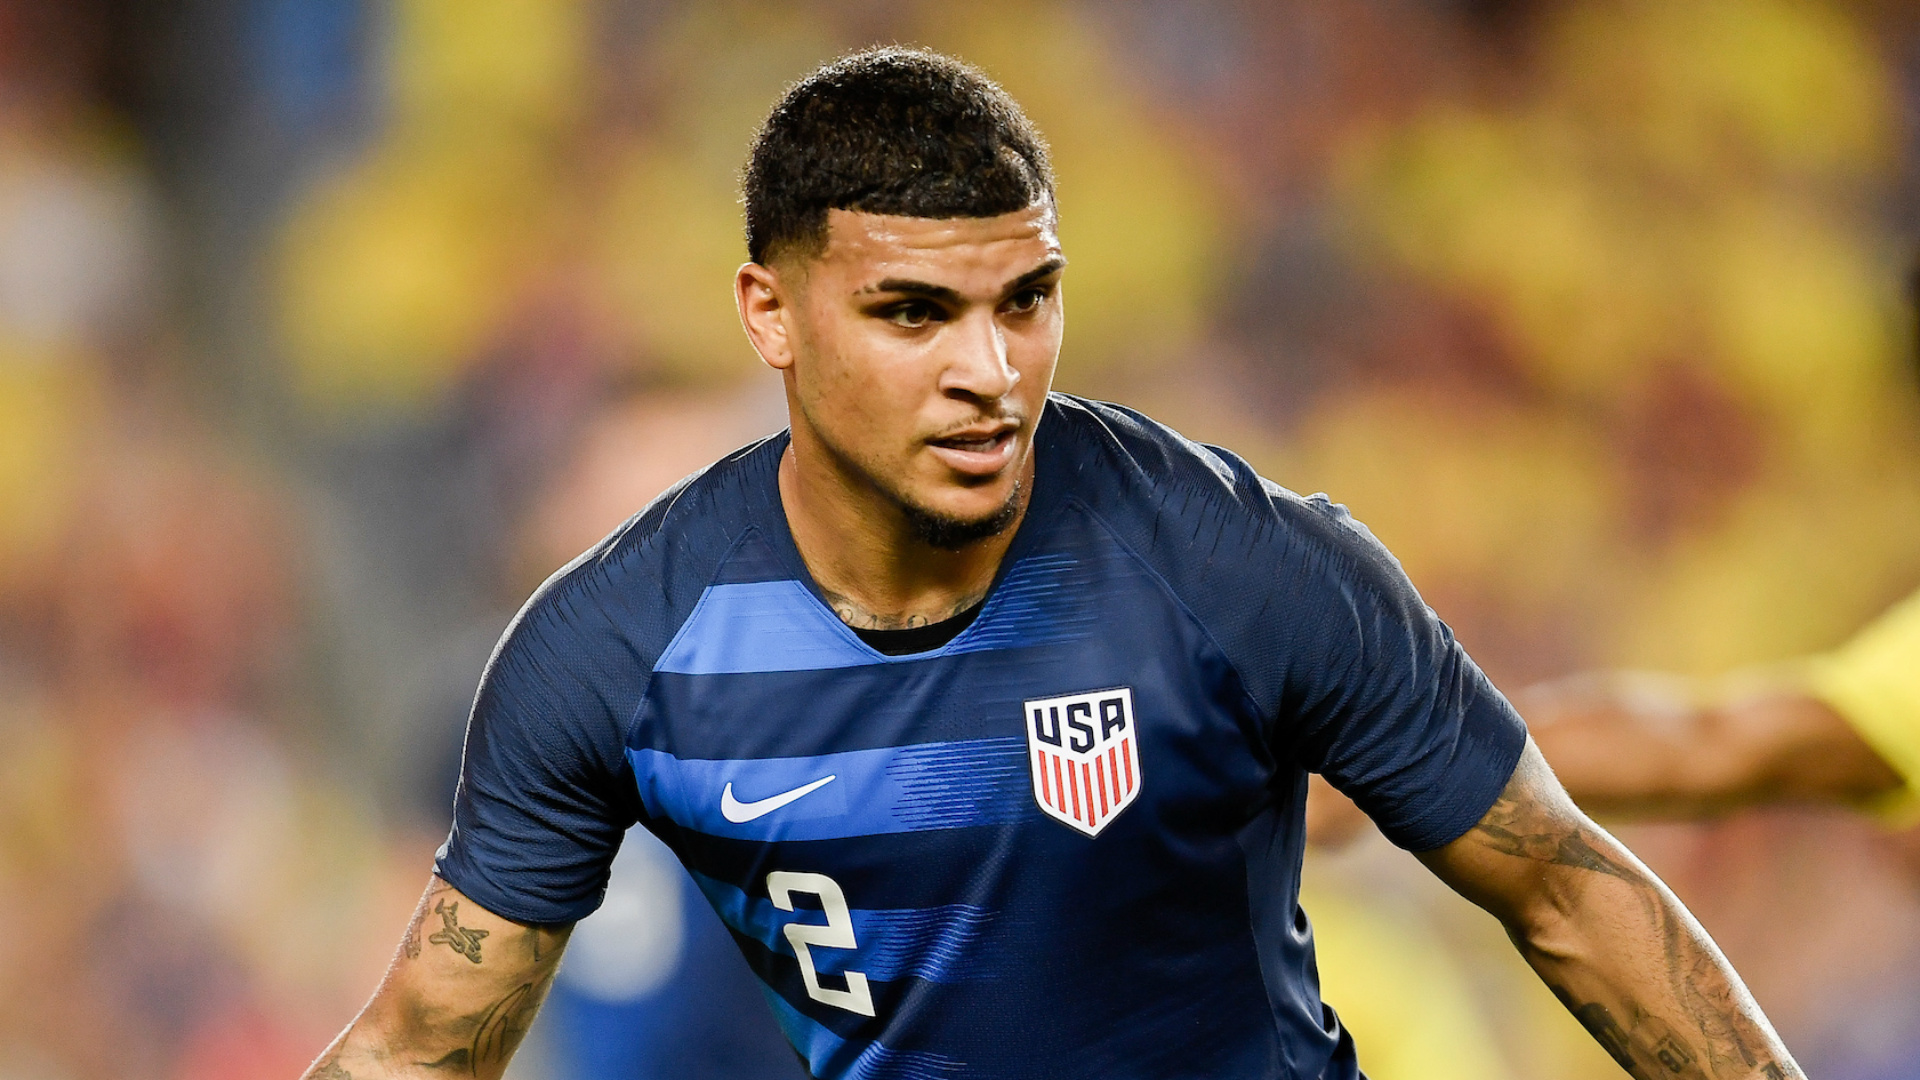 'He STILL fears for the life of his black grandchild' - USMNT defender Yedlin reveals emotional message from grandfather